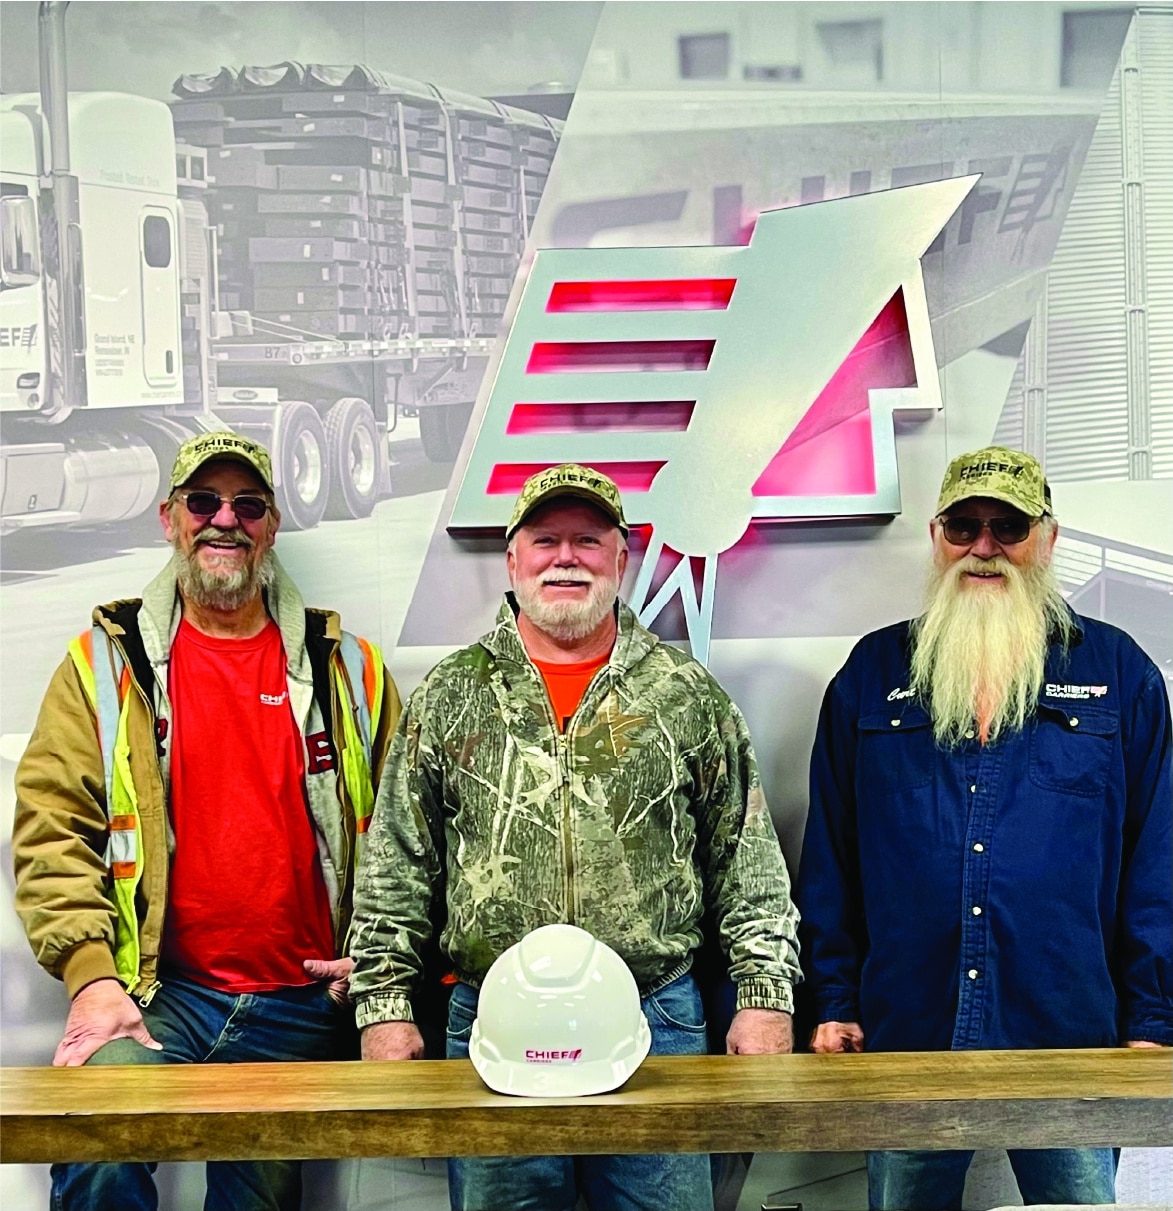 three chief carriers employees standing in front of the logo in front of a hard hat on a wooden narrow table